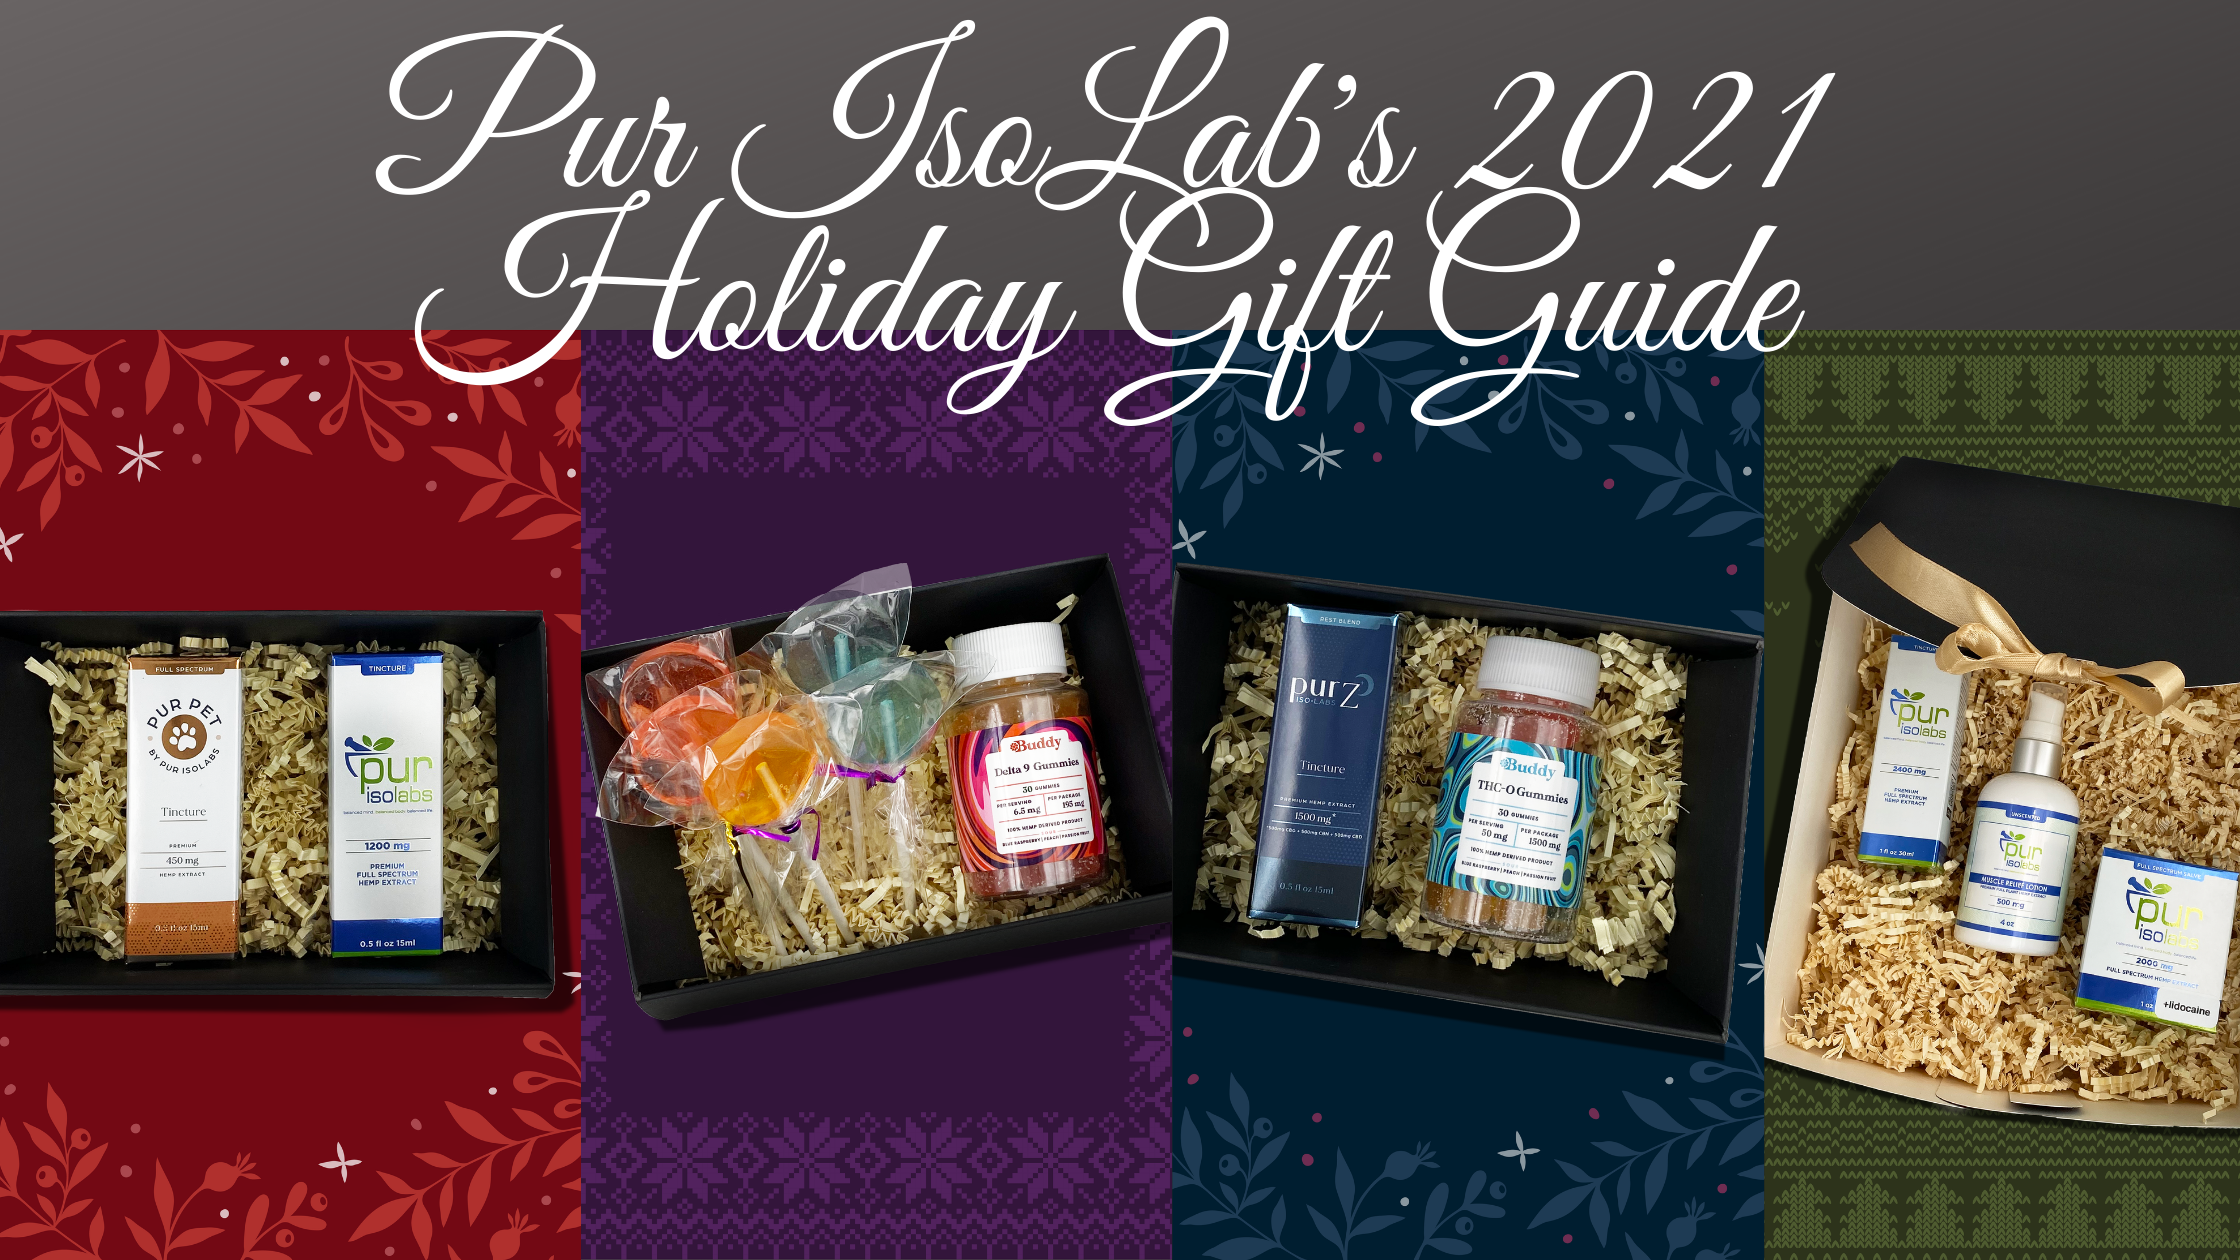 Pur IsoLab's 2021 Holiday Gift guide